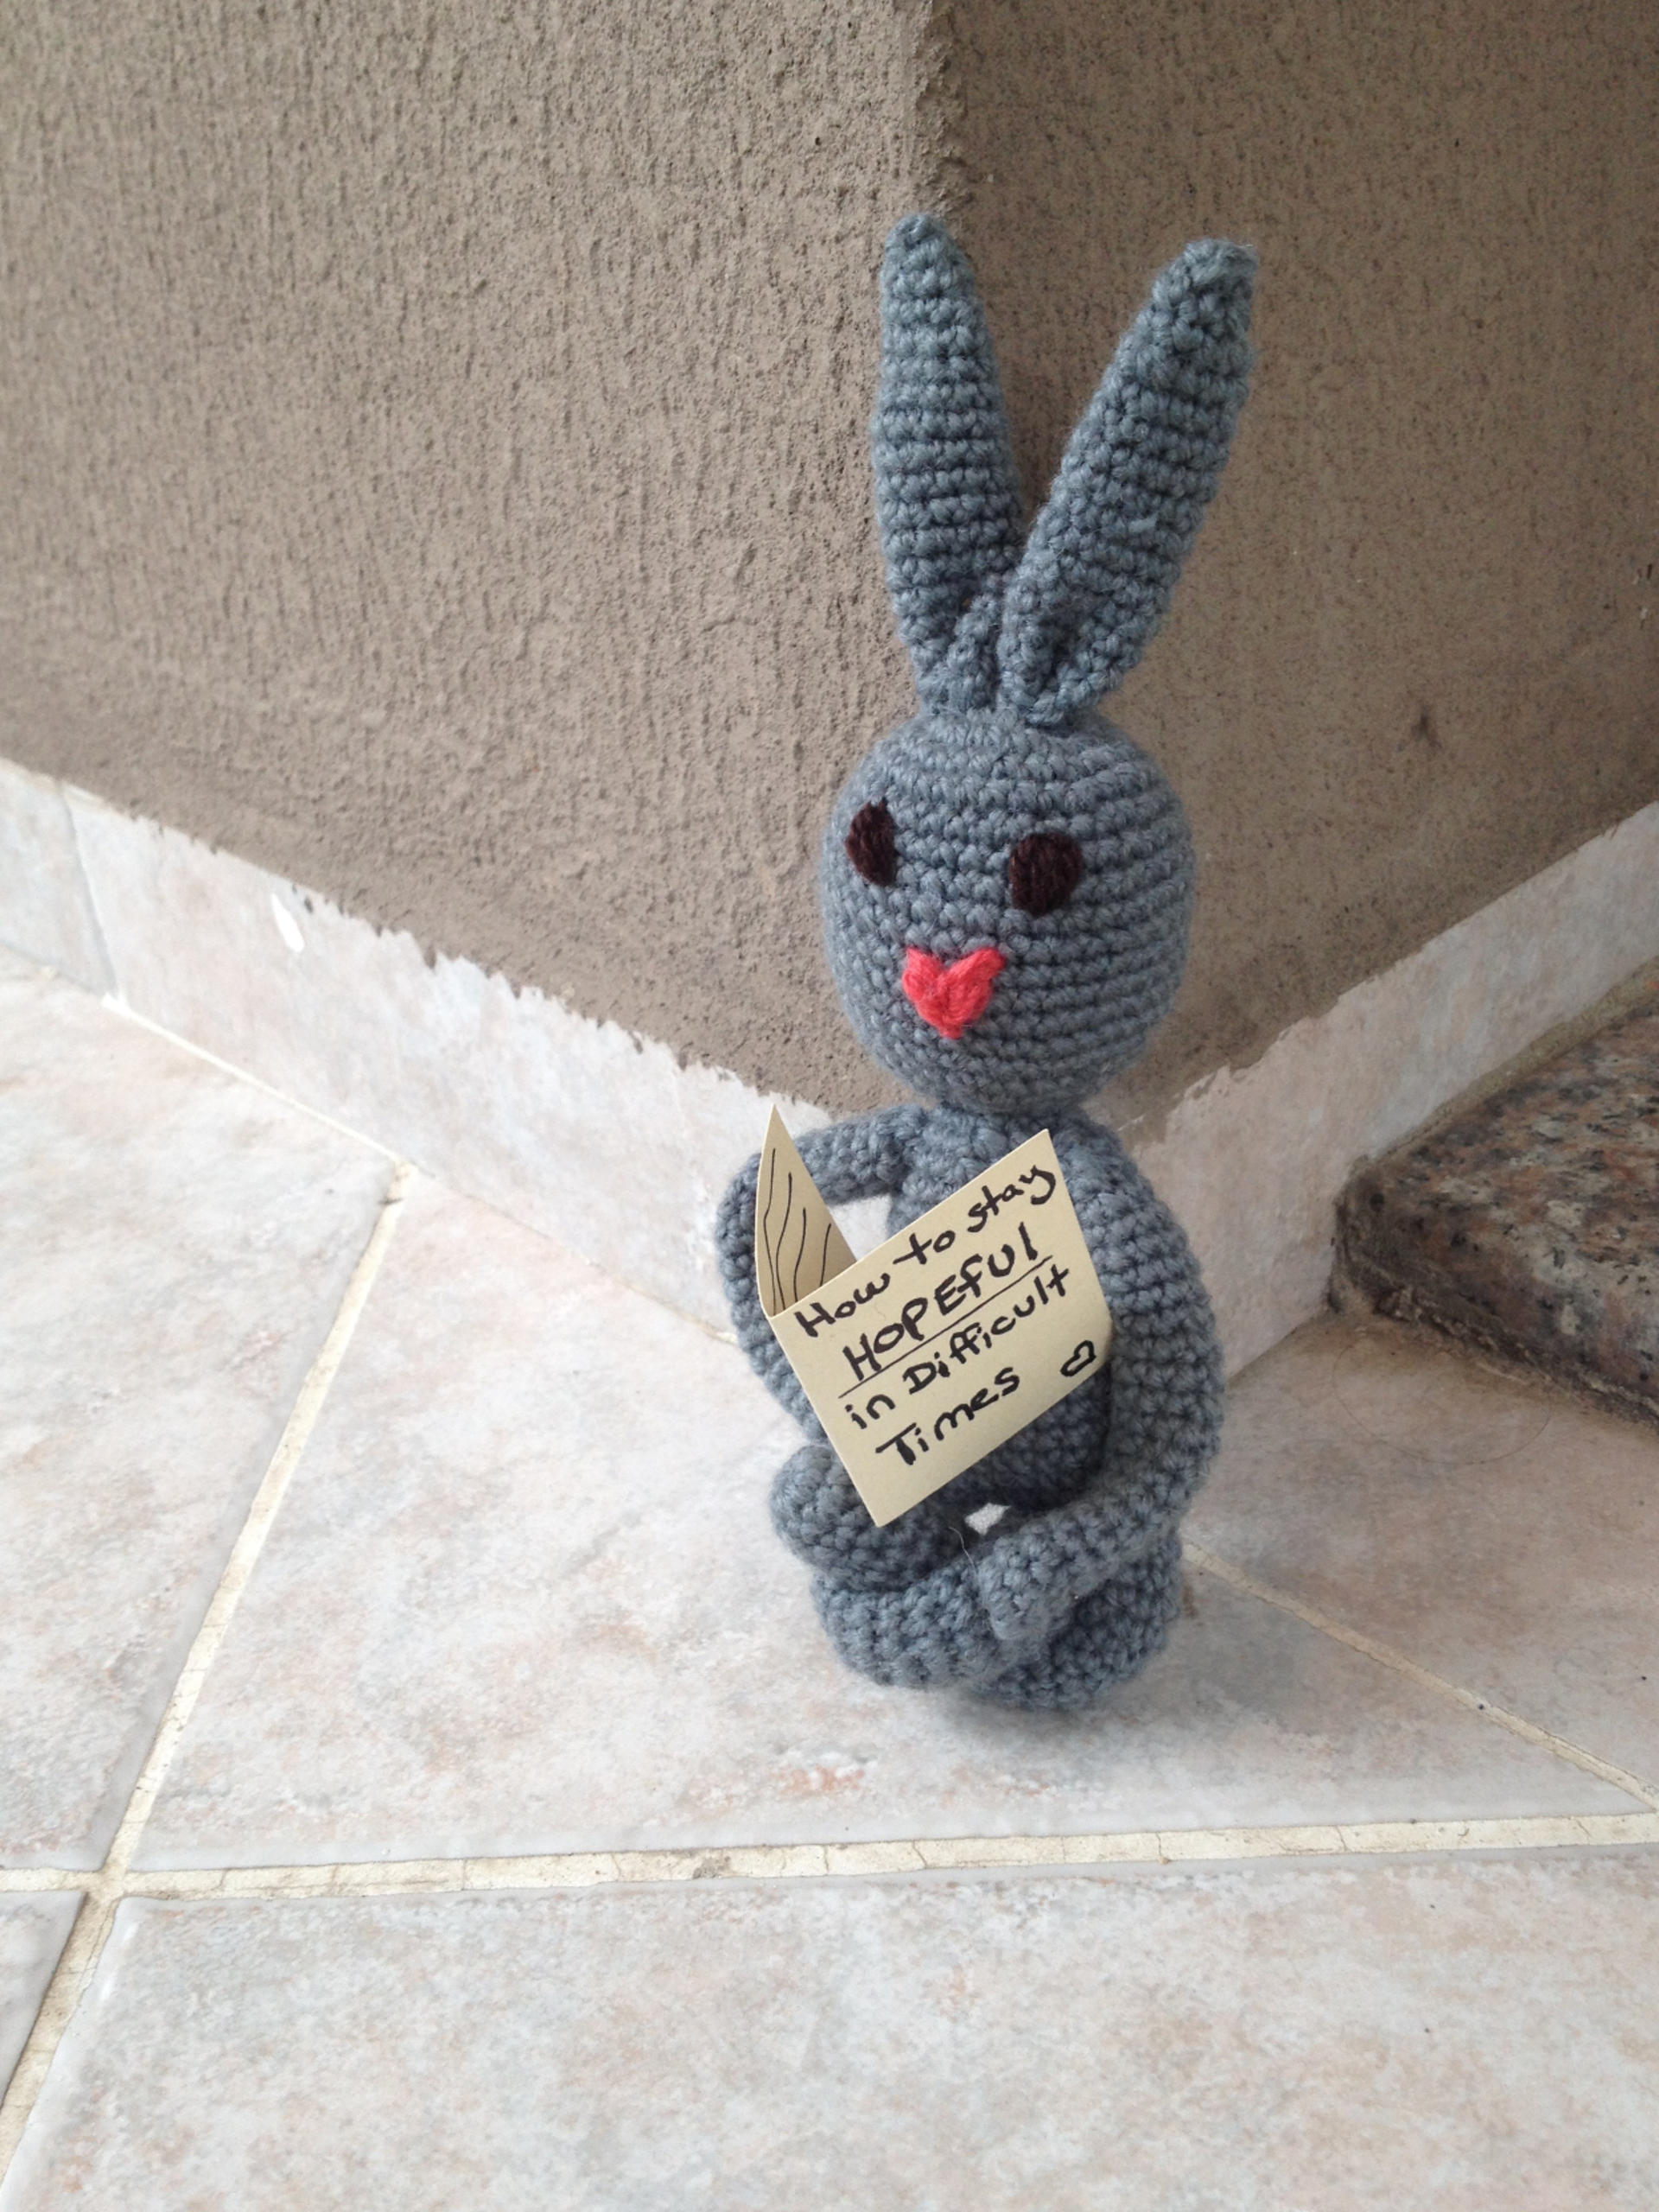 Amal - comfort bunny - knitted by Syrian refugee women in Turkey - help and smile